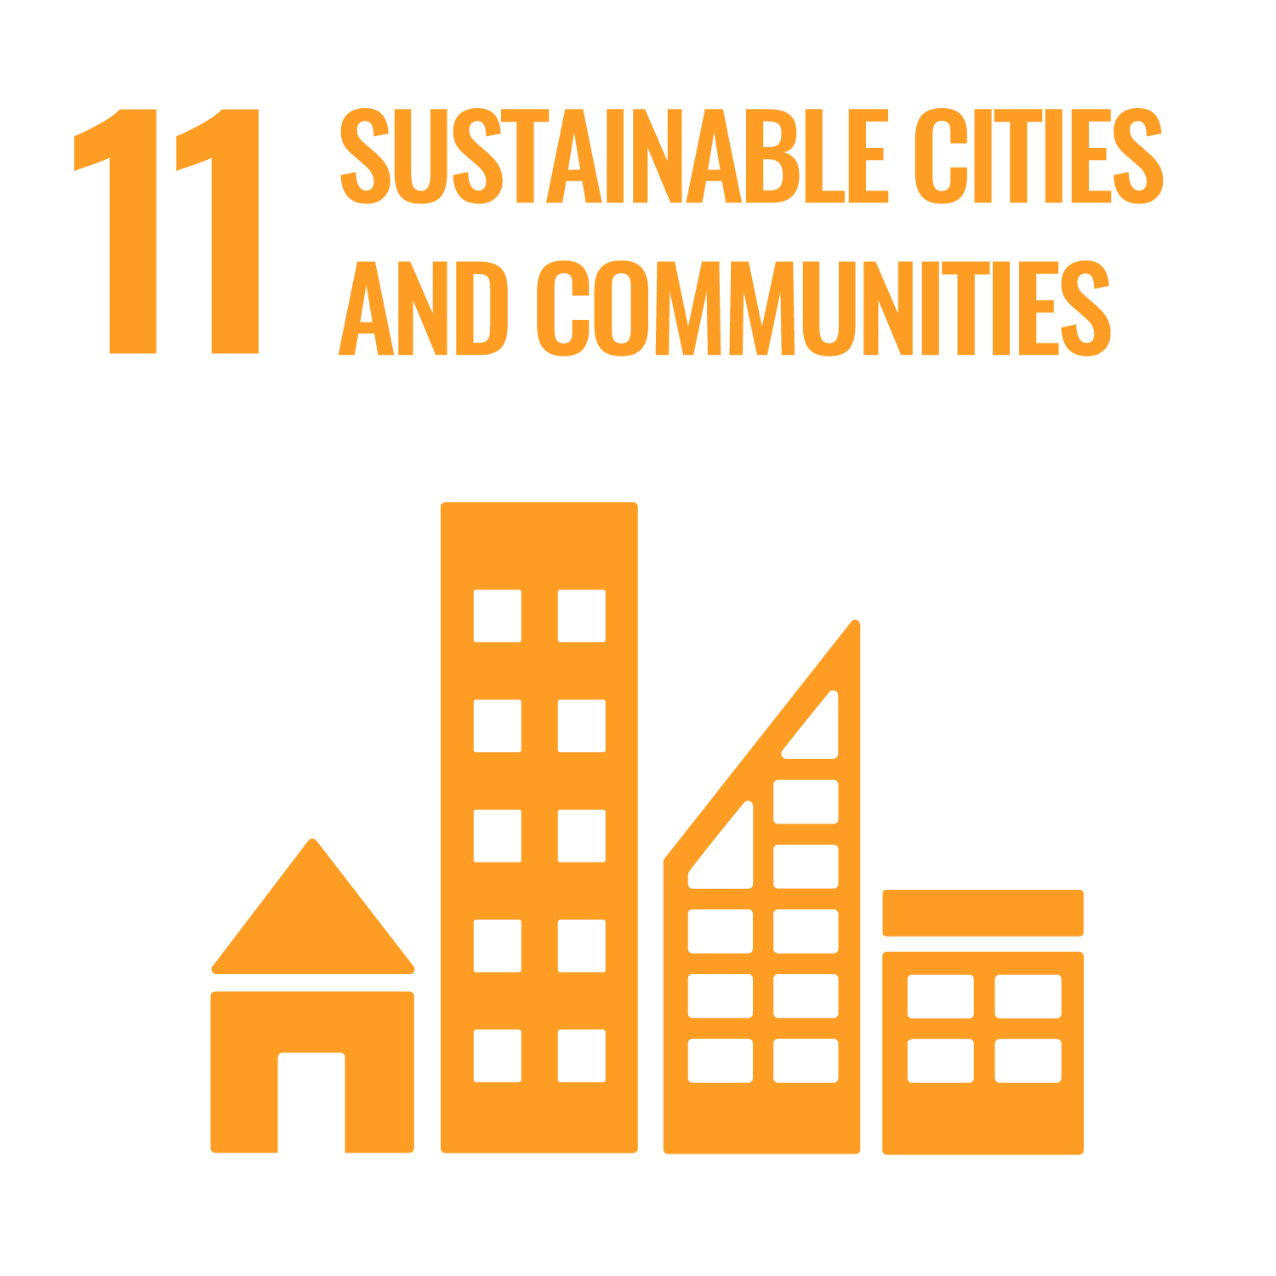 Goal 11: Sustainable Cities and Communities